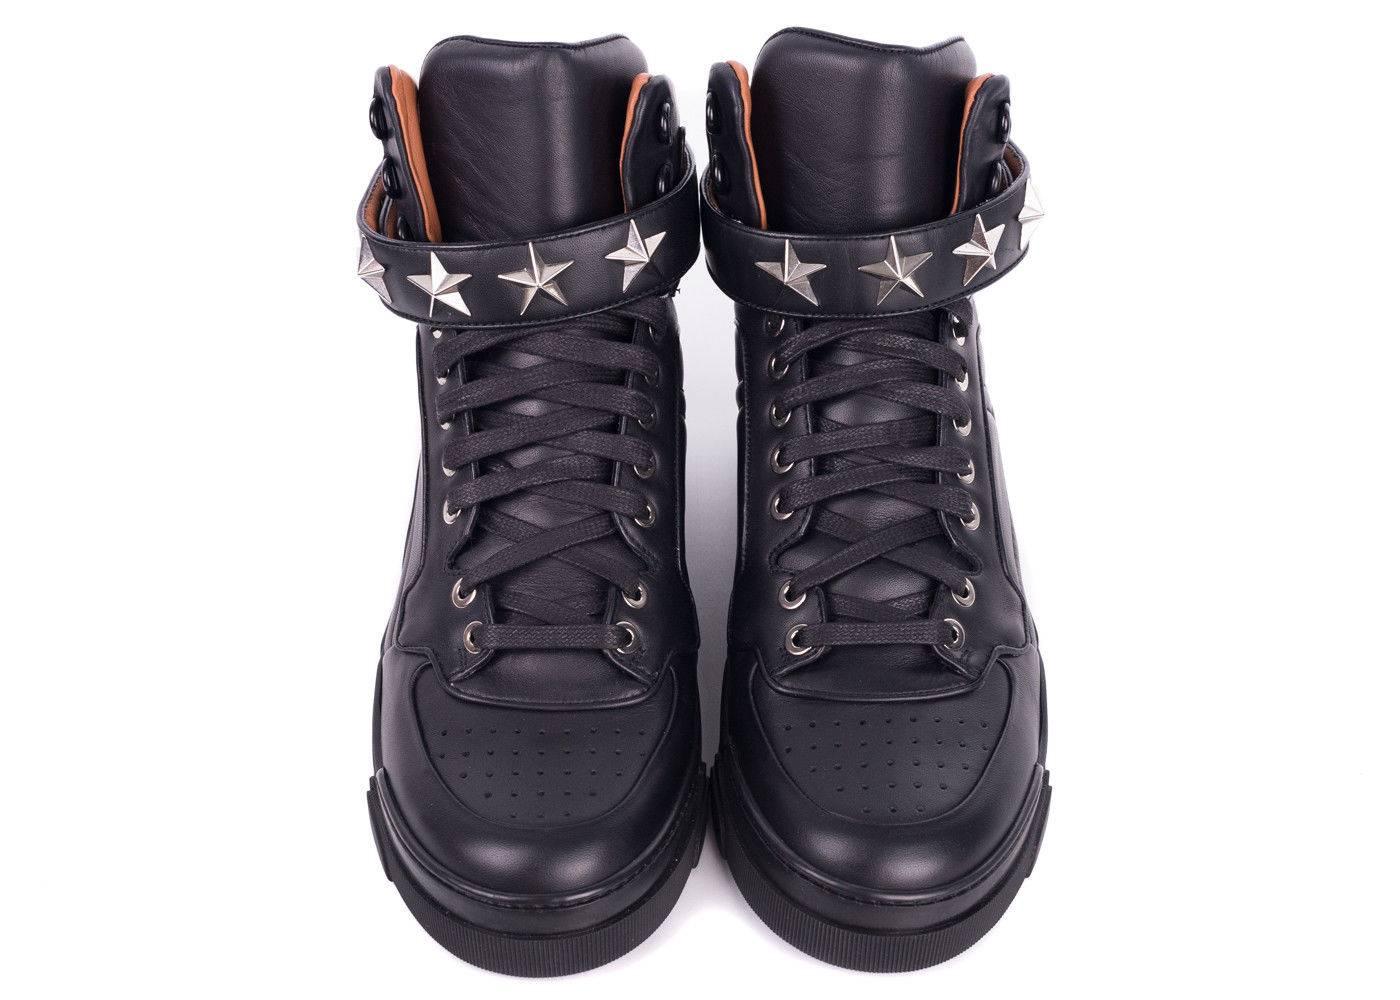 Givenchy's Tyson High Top Sneaker is this season's must have. This sneaker features Givenchy's signature star studded strap , pure genuine leather, and tonal black laces. You can pair these sneakers with leather pants and a moto jacket for a natural